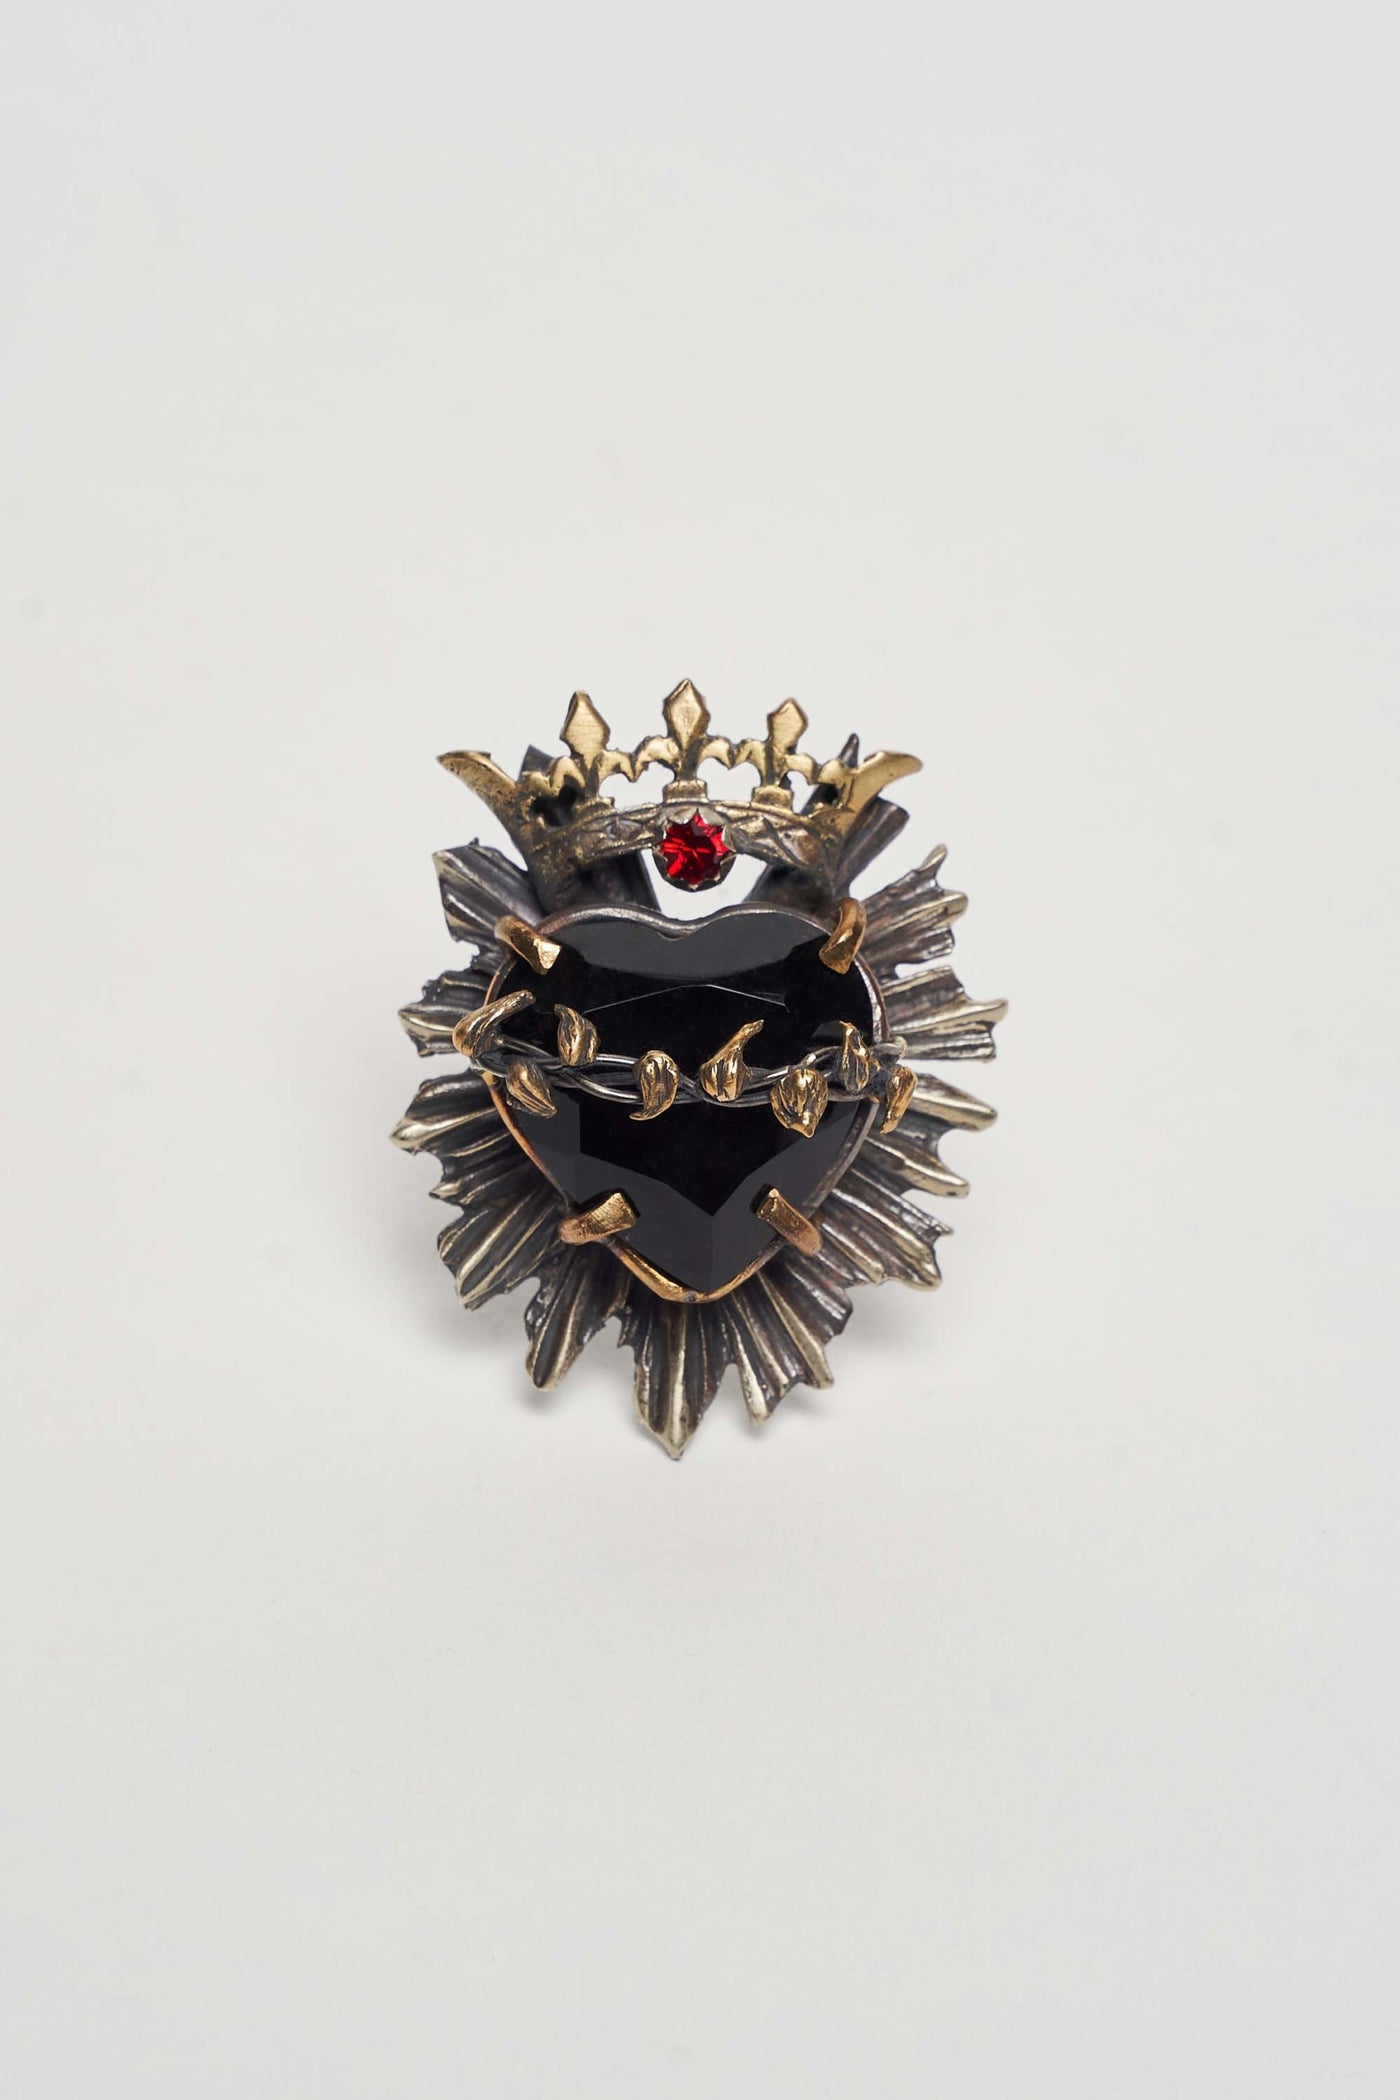 SAGRADO CORAZON CROWN RING WITH HAND-FACETED BLACK HEART AND RED CRYSTAL